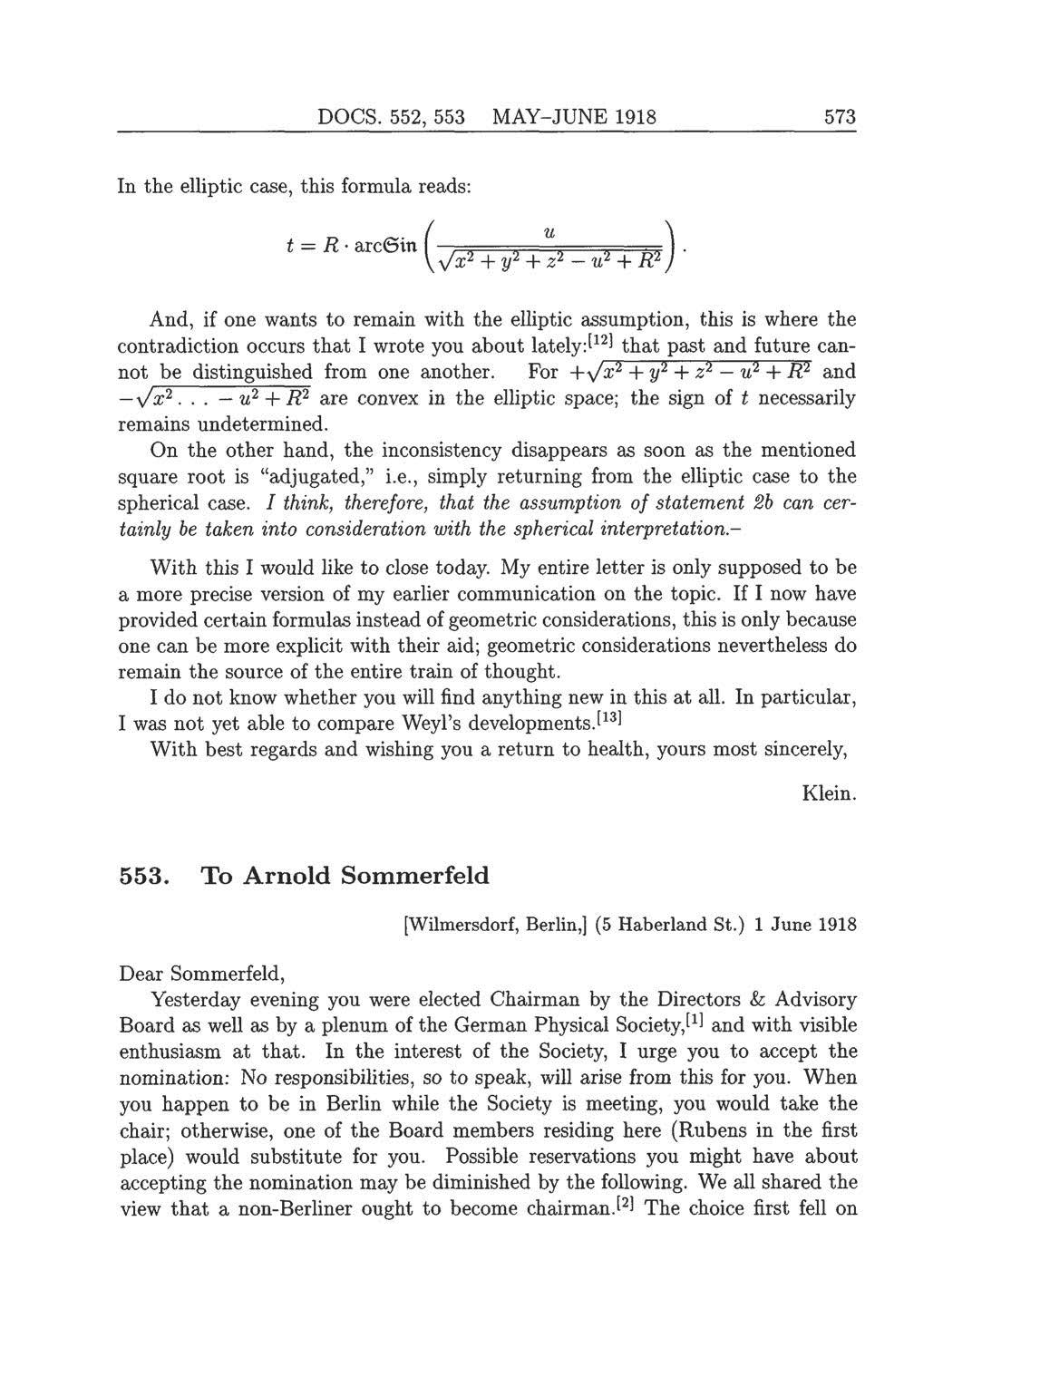 Volume 8: The Berlin Years: Correspondence, 1914-1918 (English translation supplement) page 573